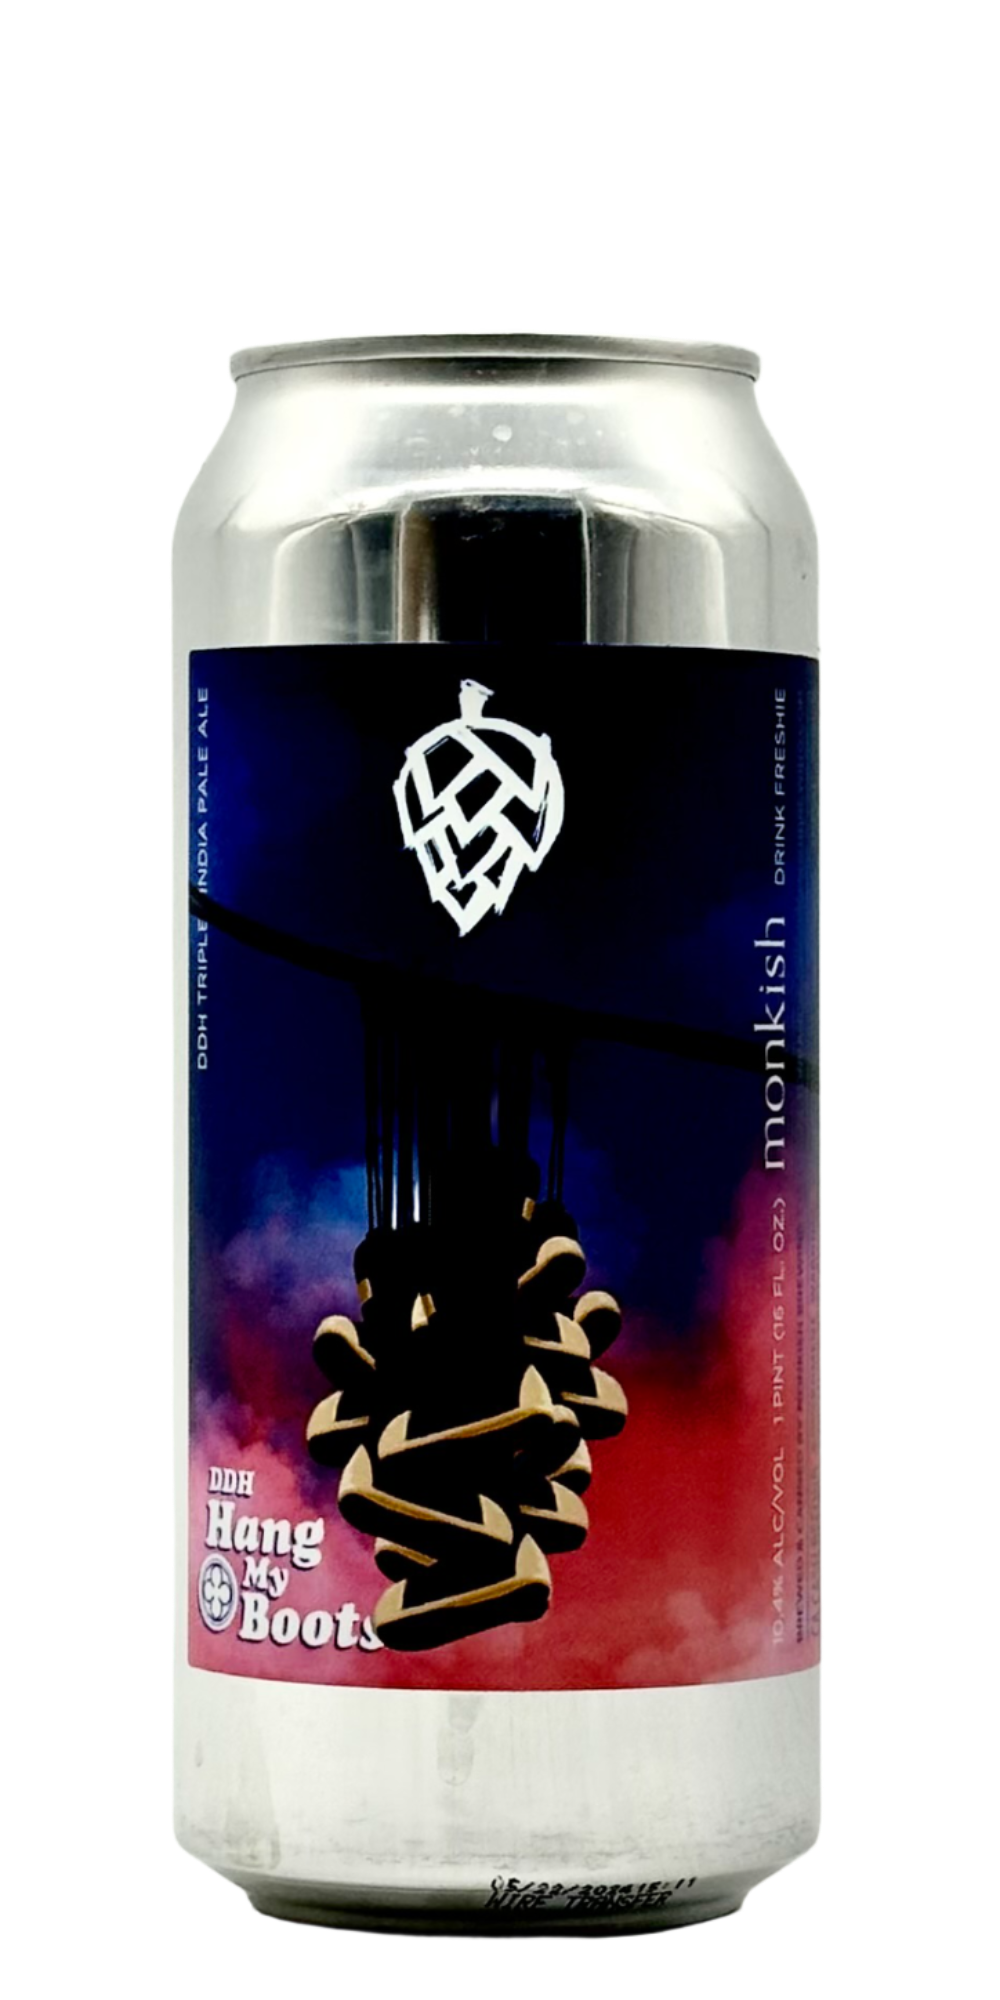 Monkish - DDH Hang My Boots